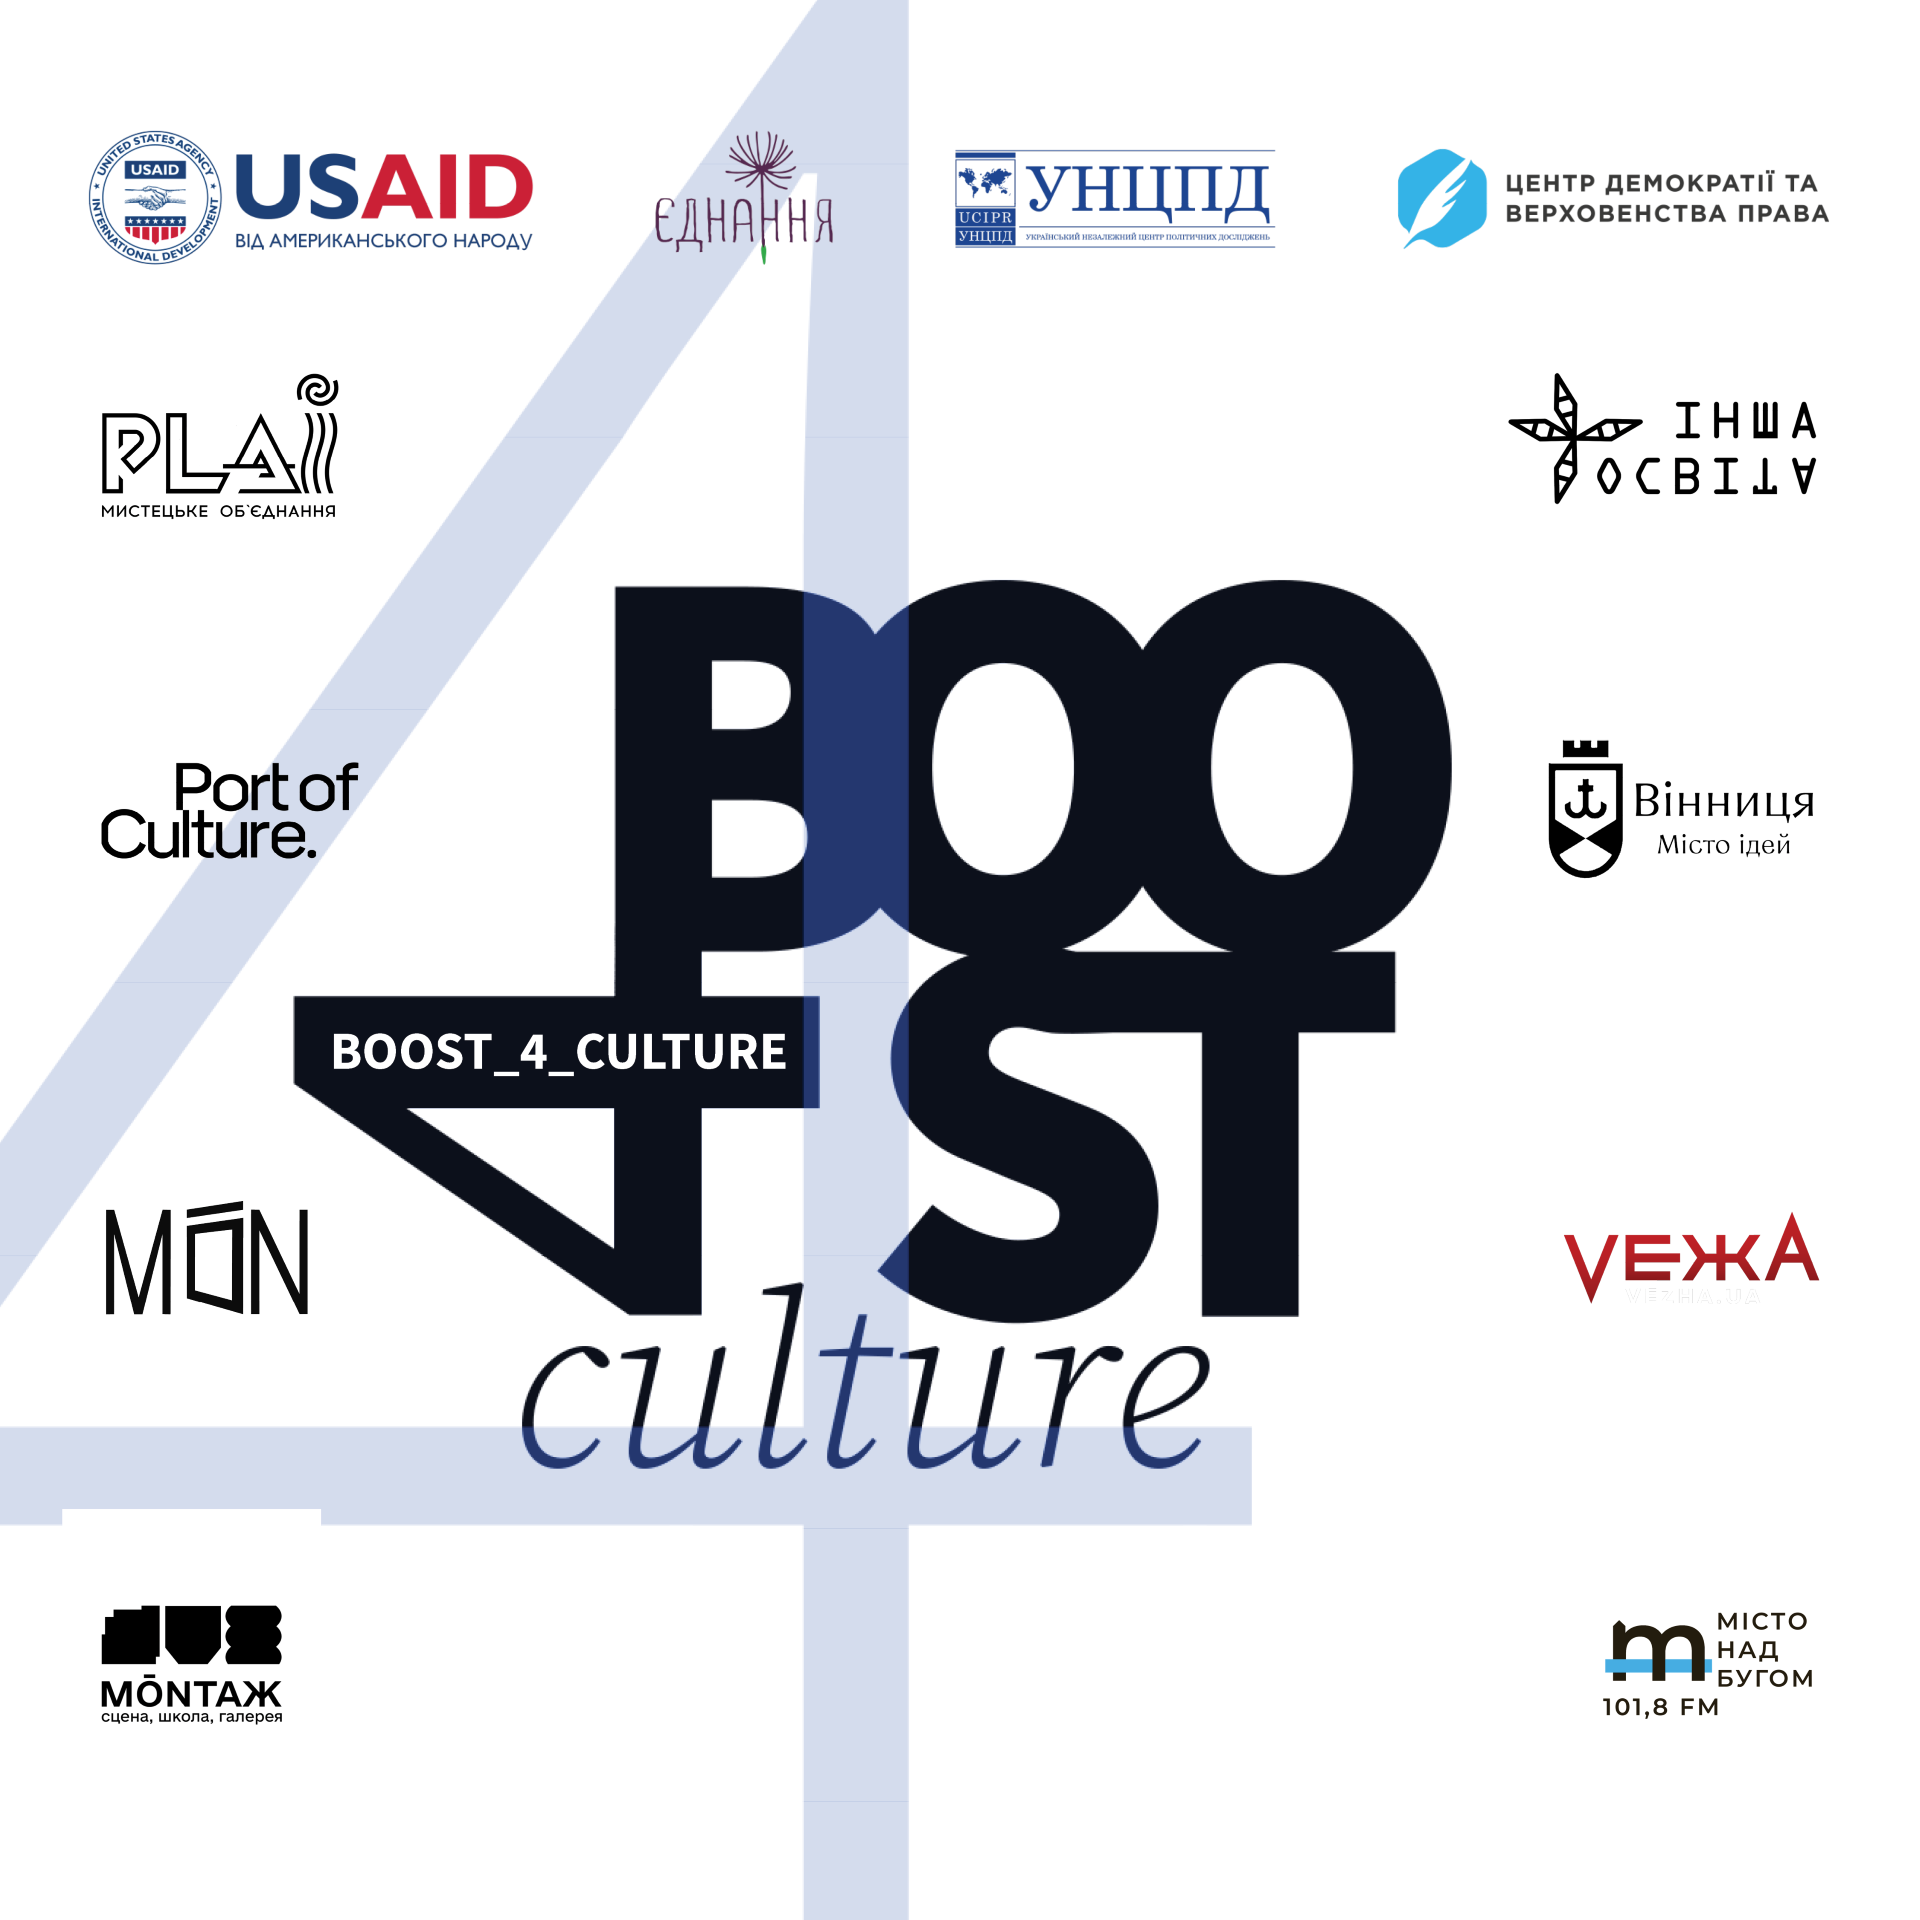 Boost_4_Culture: Educational course for cultural and creative industries professionals in Vinnytsia